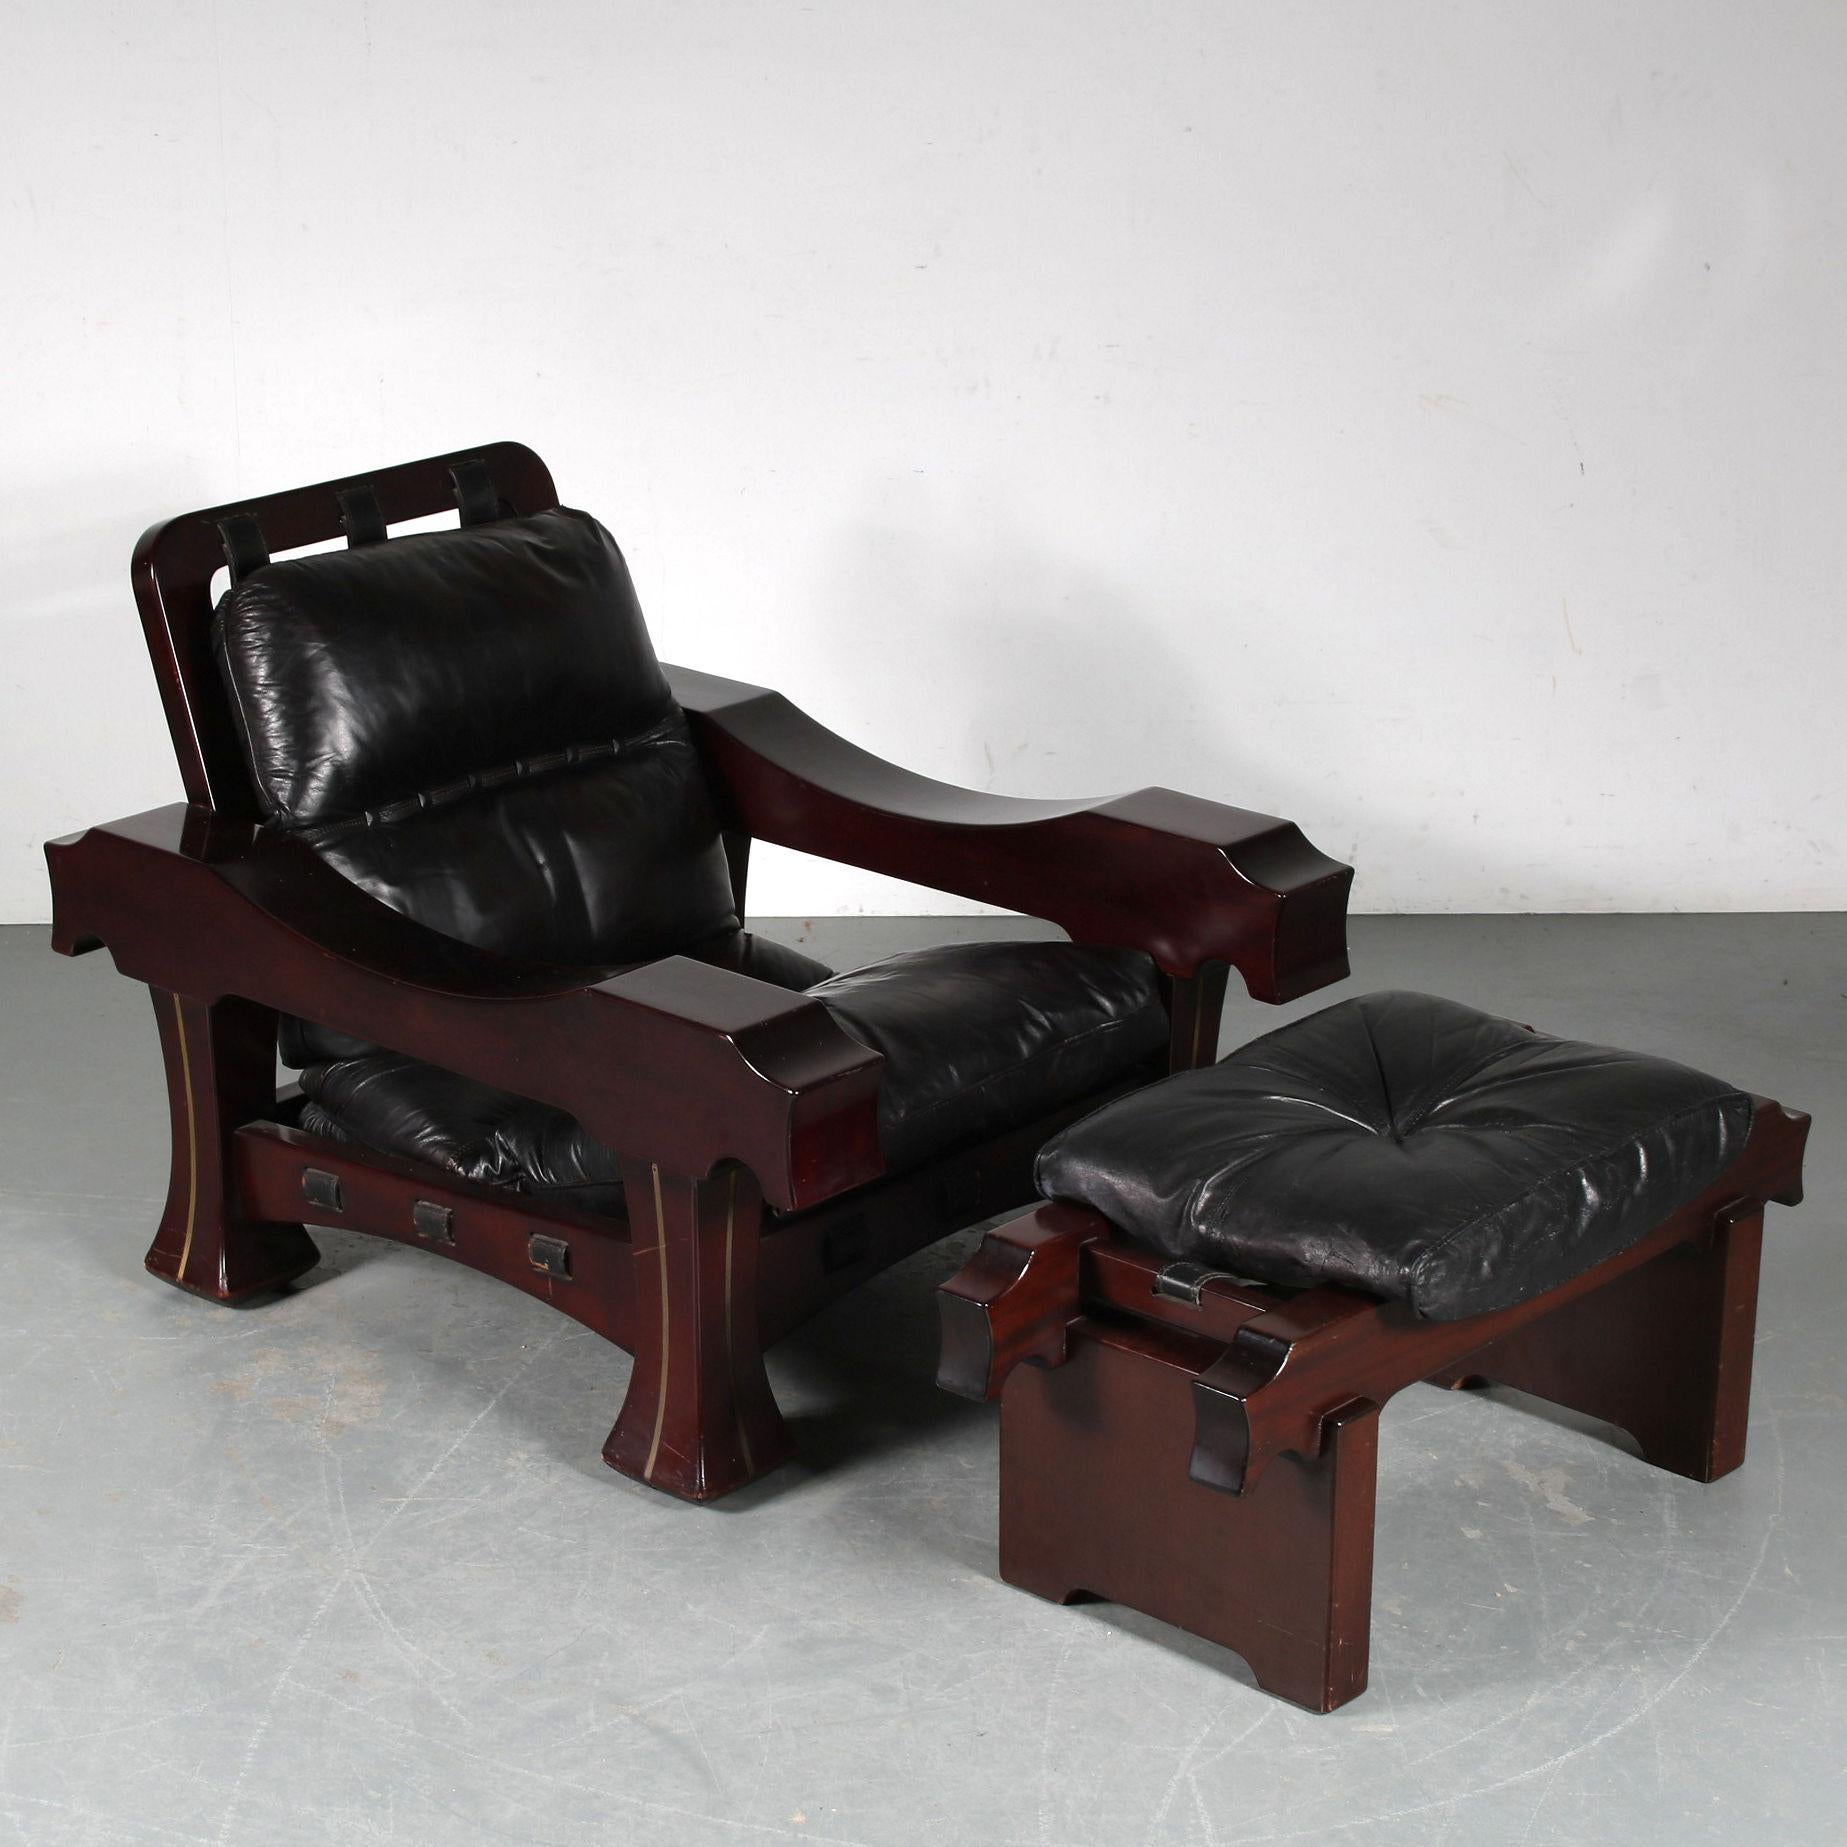 Italian Lounge Chair with Foot Stool by Luciano Frigerio, 1970 In Good Condition For Sale In Amsterdam, NL